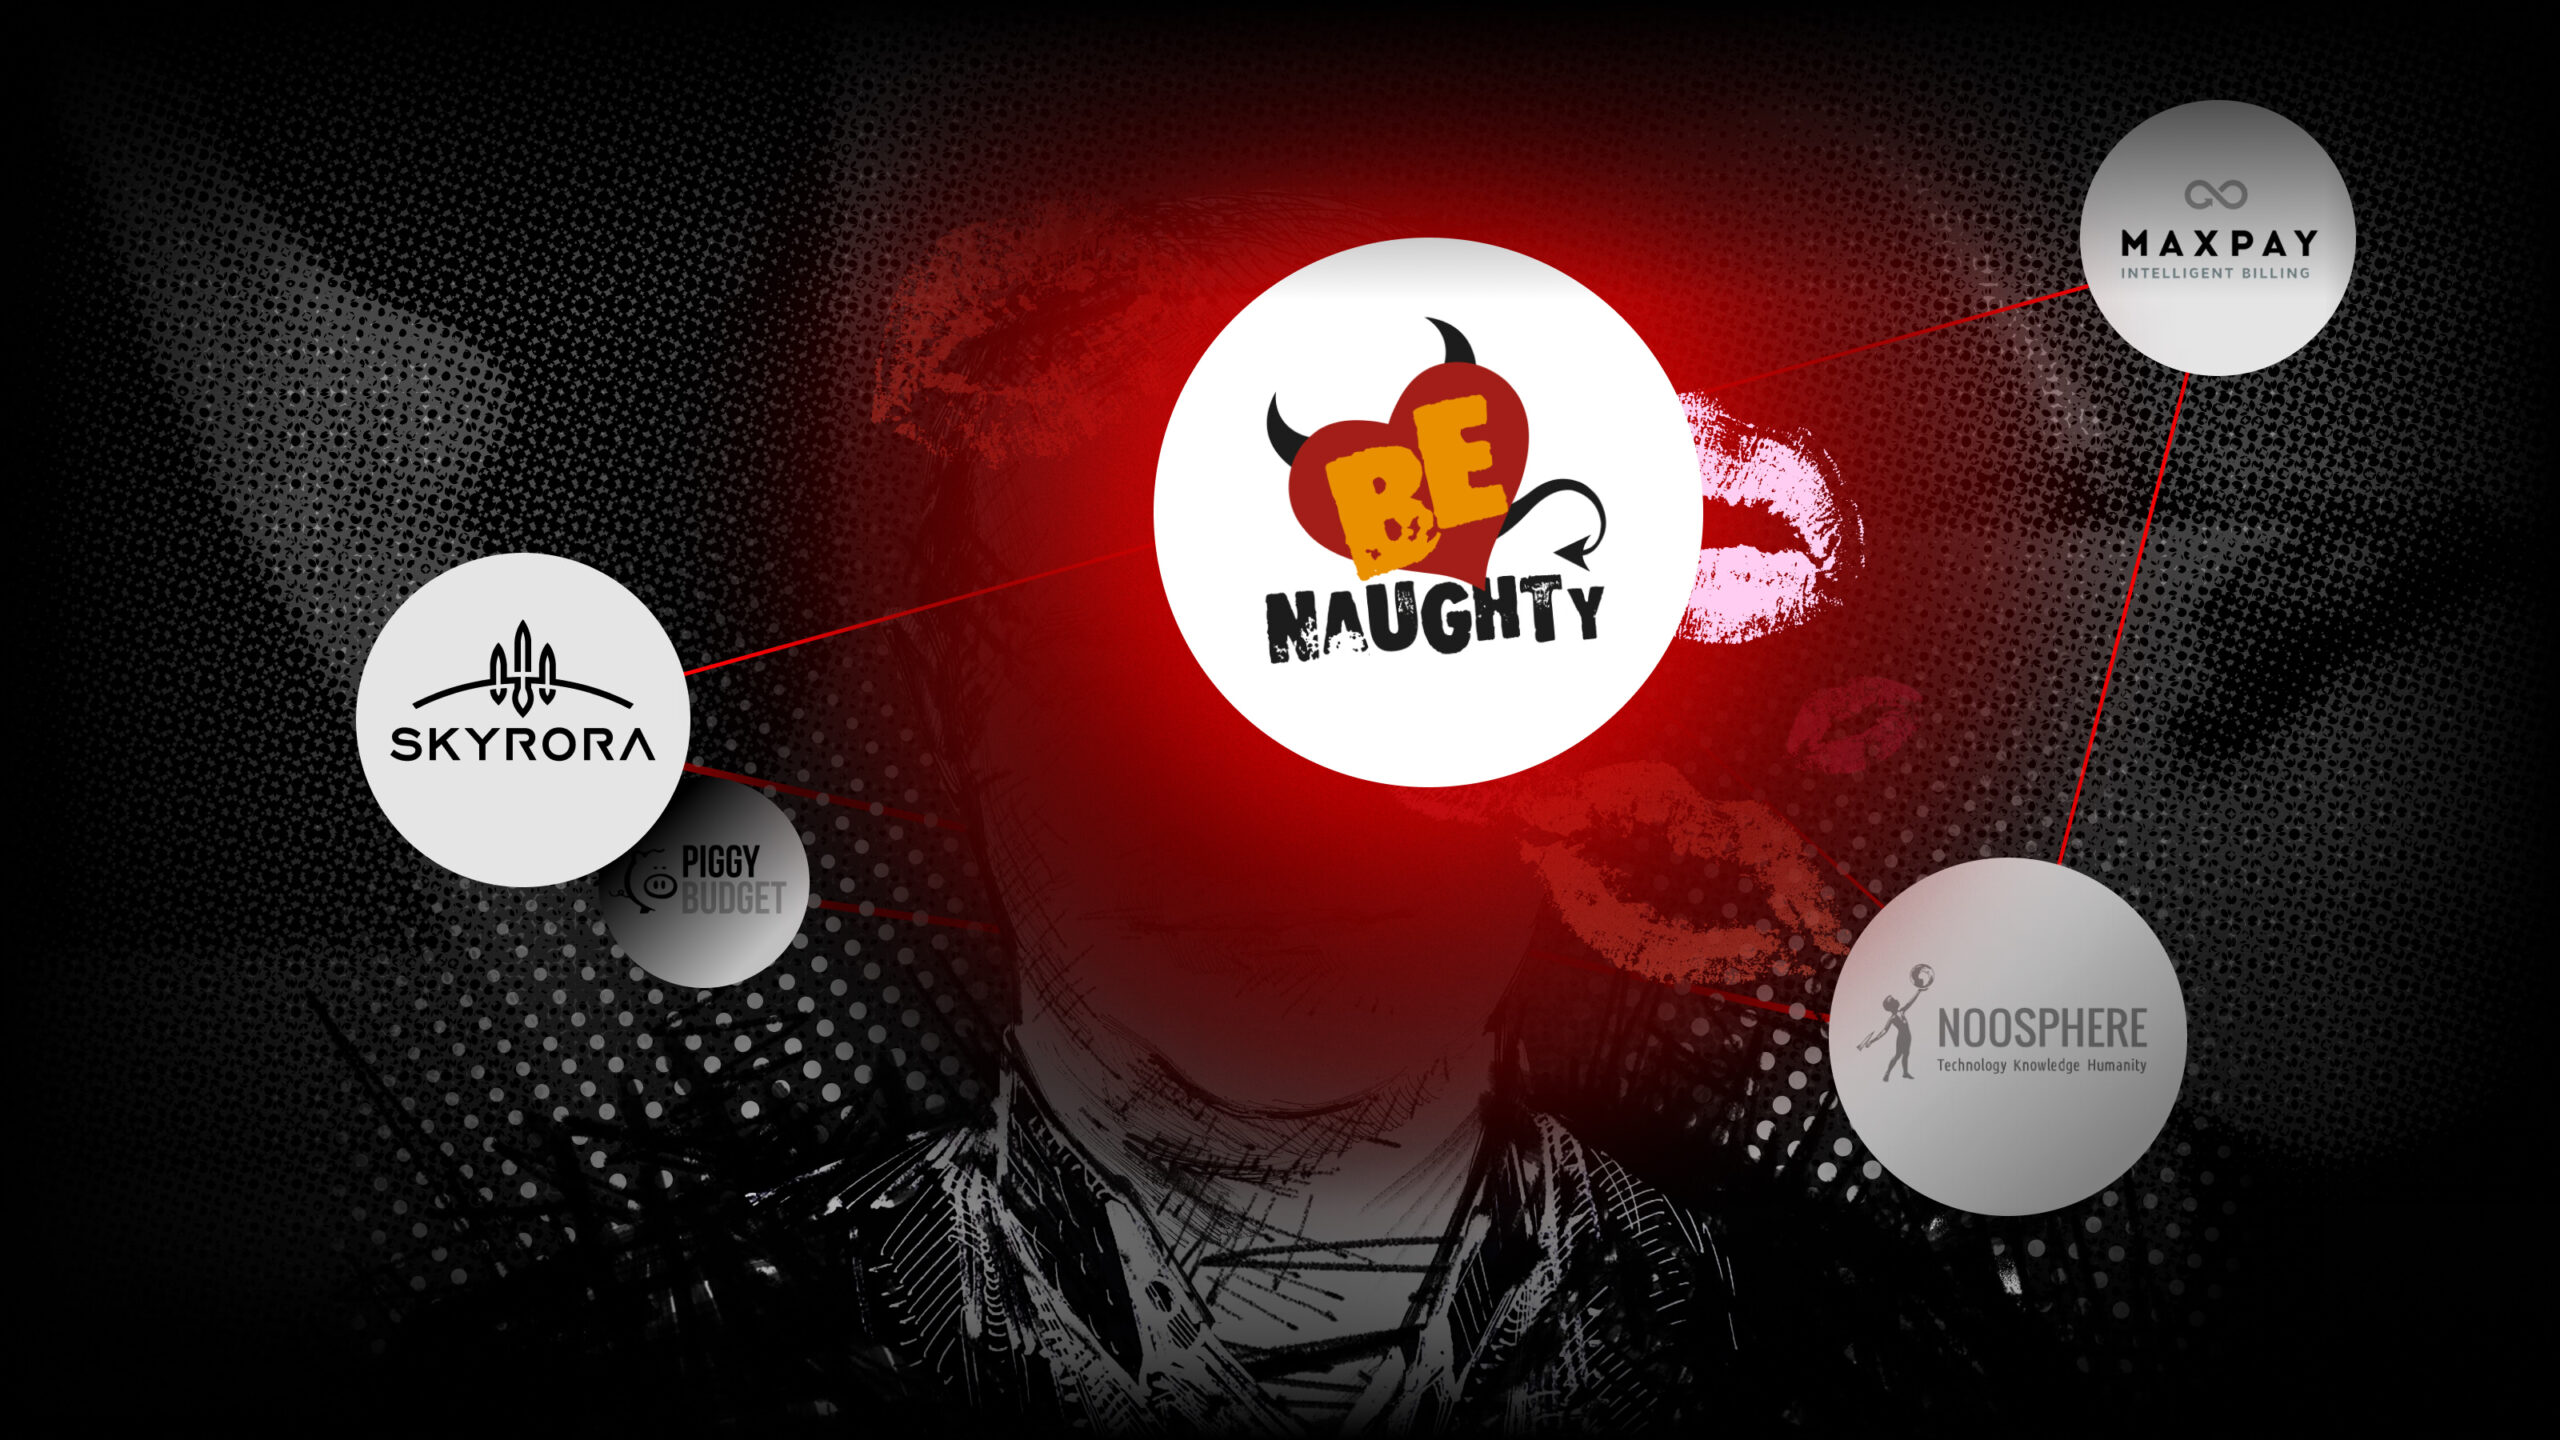 Illustration of a figure with face obscured by a glowing red Be Naughty logo. In the background are the logos of other companies discussed in this series connected by red lines.